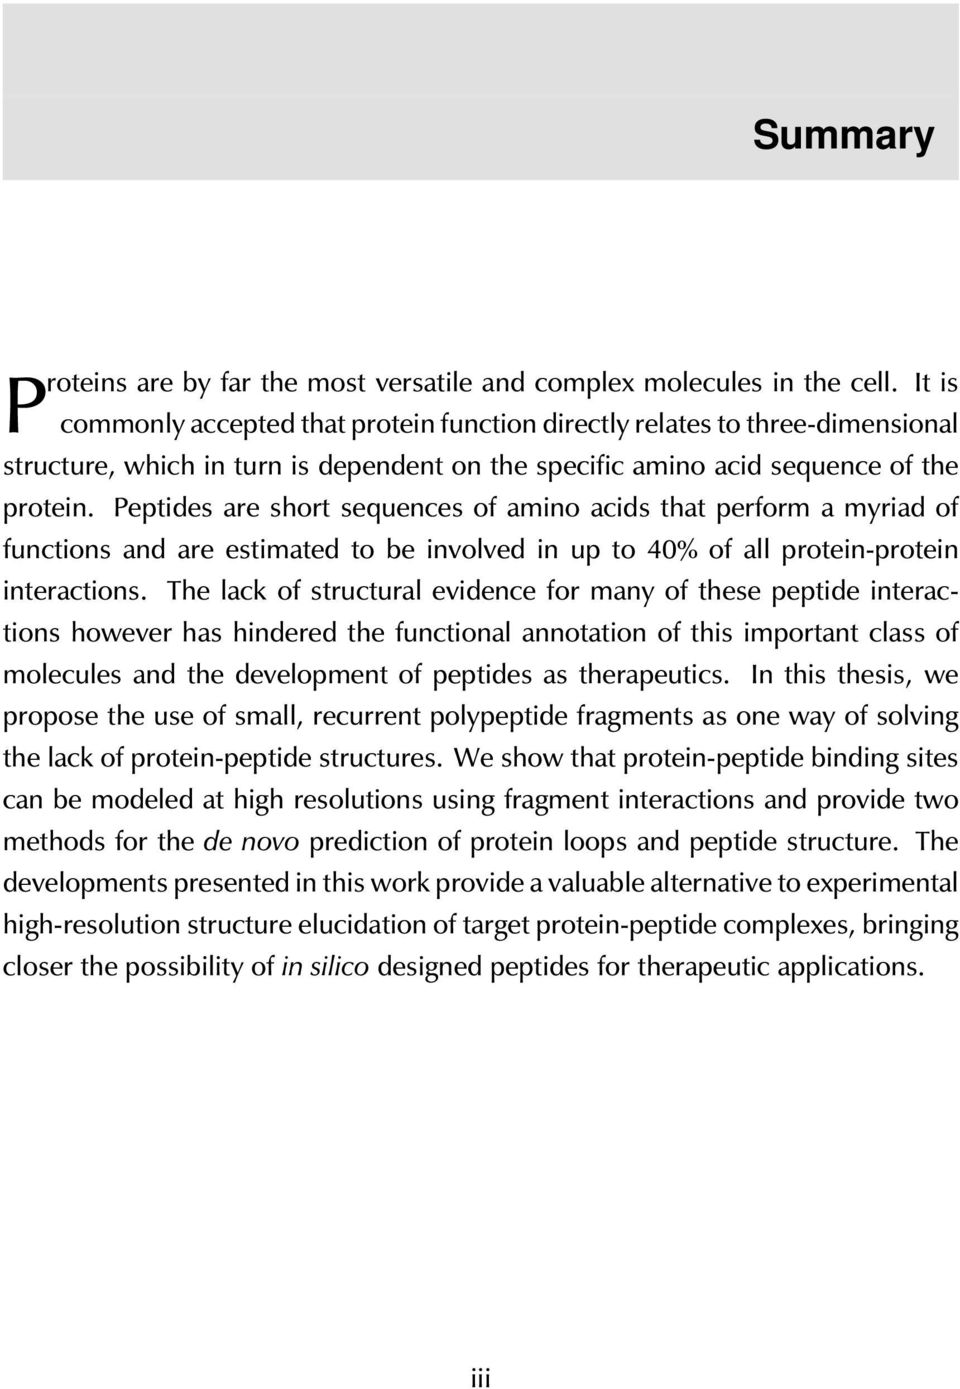 Peptides are short sequences of amino acids that perform a myriad of functions and are estimated to be involved in up to 40% of all protein-protein interactions.